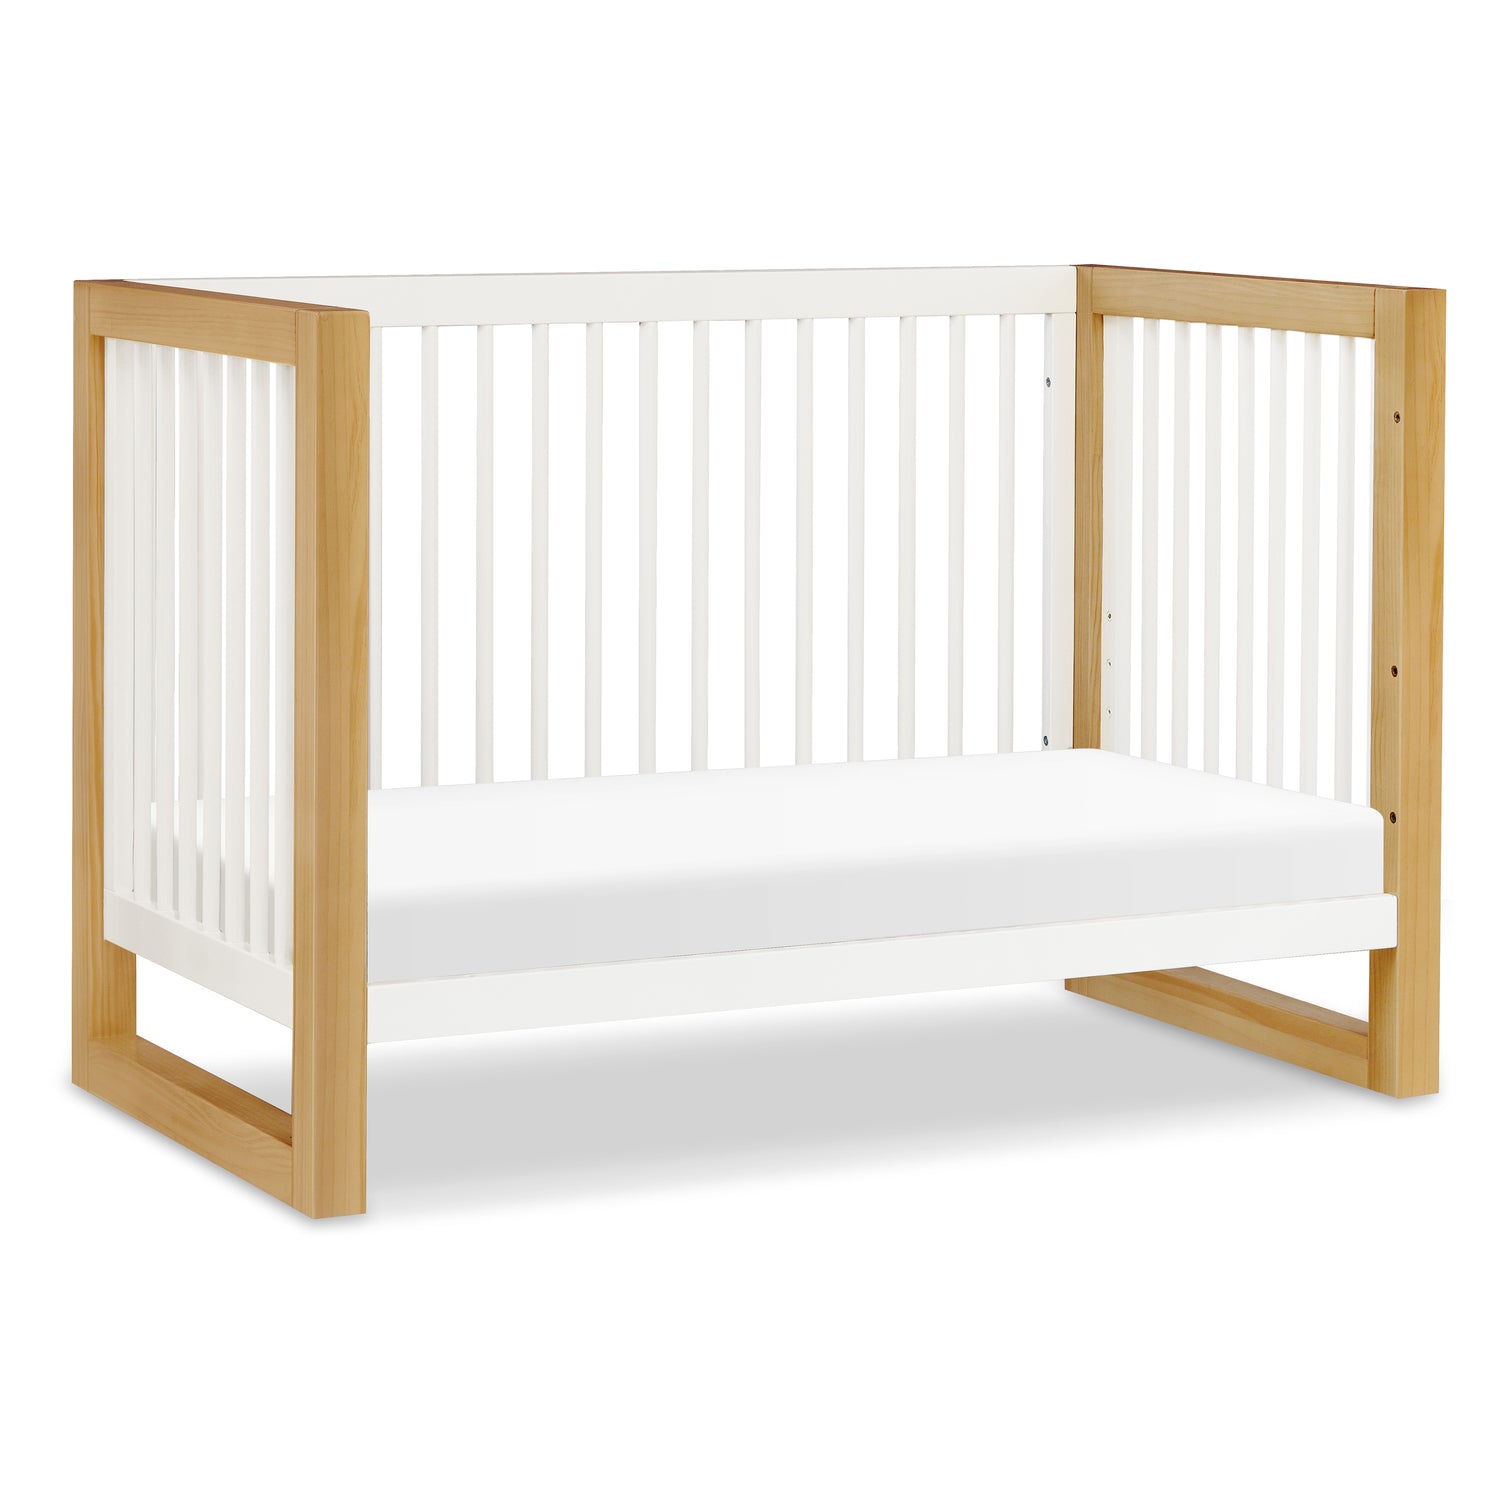 M23301RWHY,Nantucket 3-in-1 Convertible Crib w/ Toddler Bed Conversion Kit in Warm White/Honey